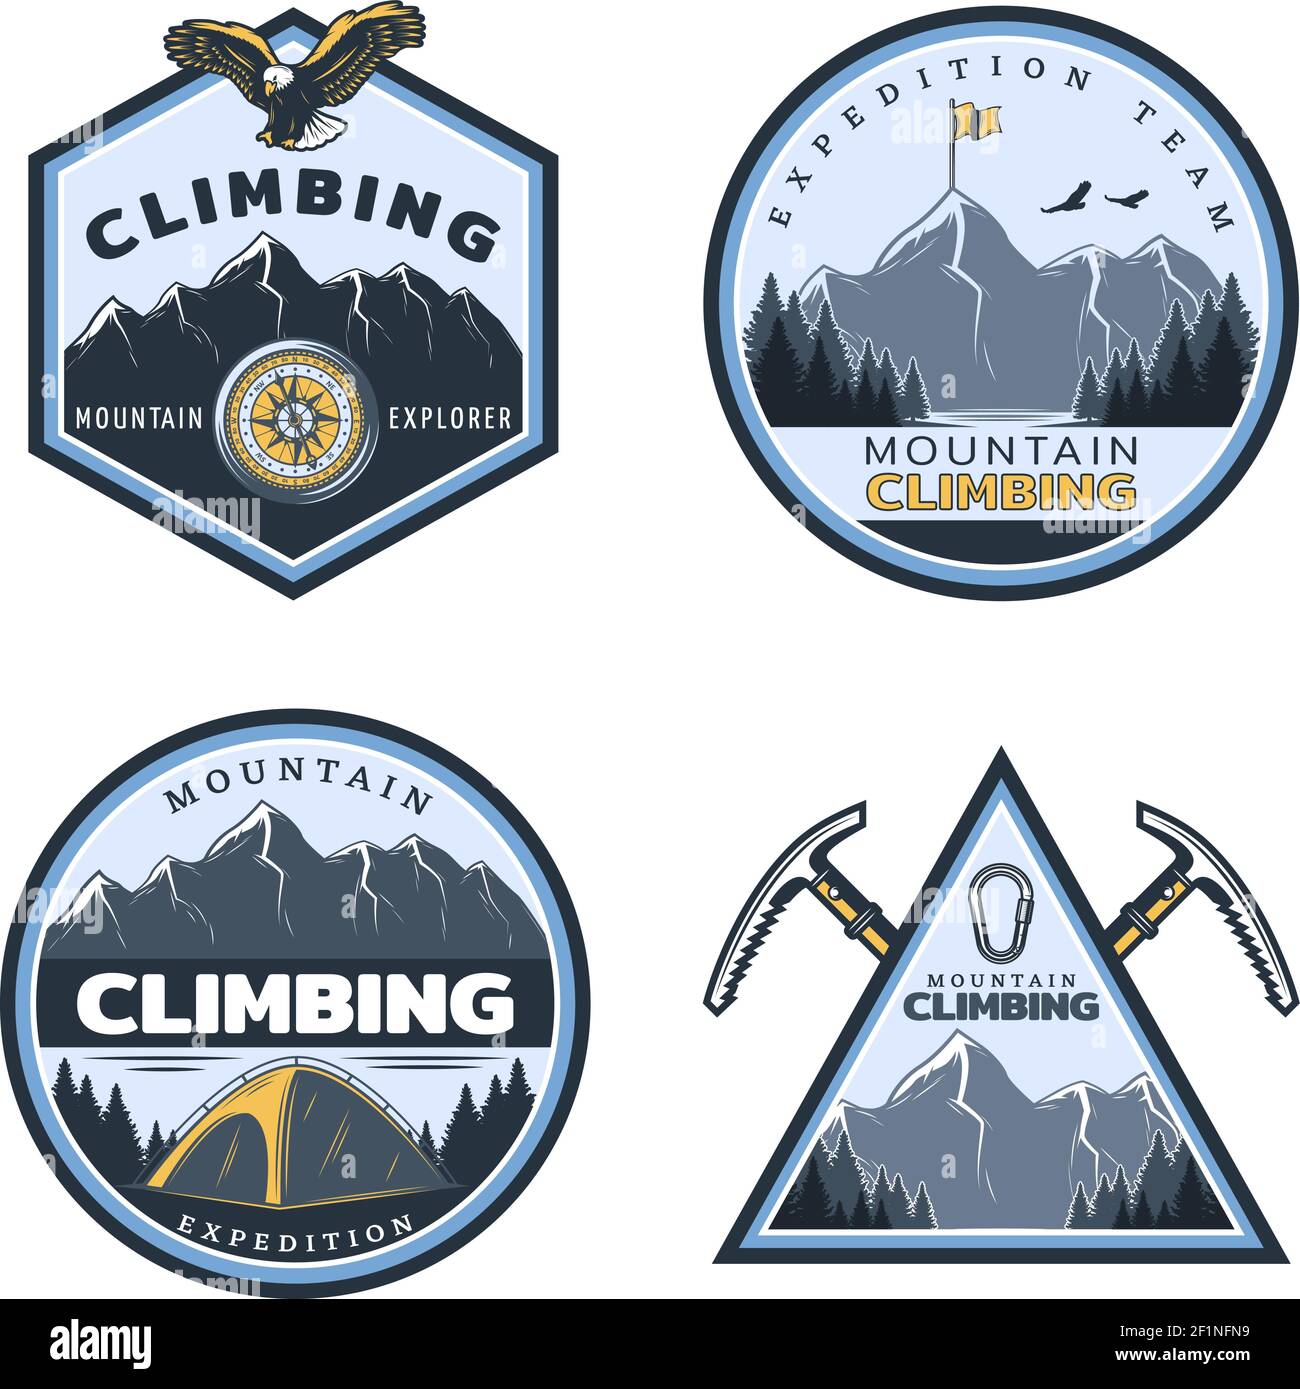 Vintage colored mountain climbing emblems set with inscriptions eagle tent pickaxes metal carabiner on nature landscape isolated vector illustration Stock Vector